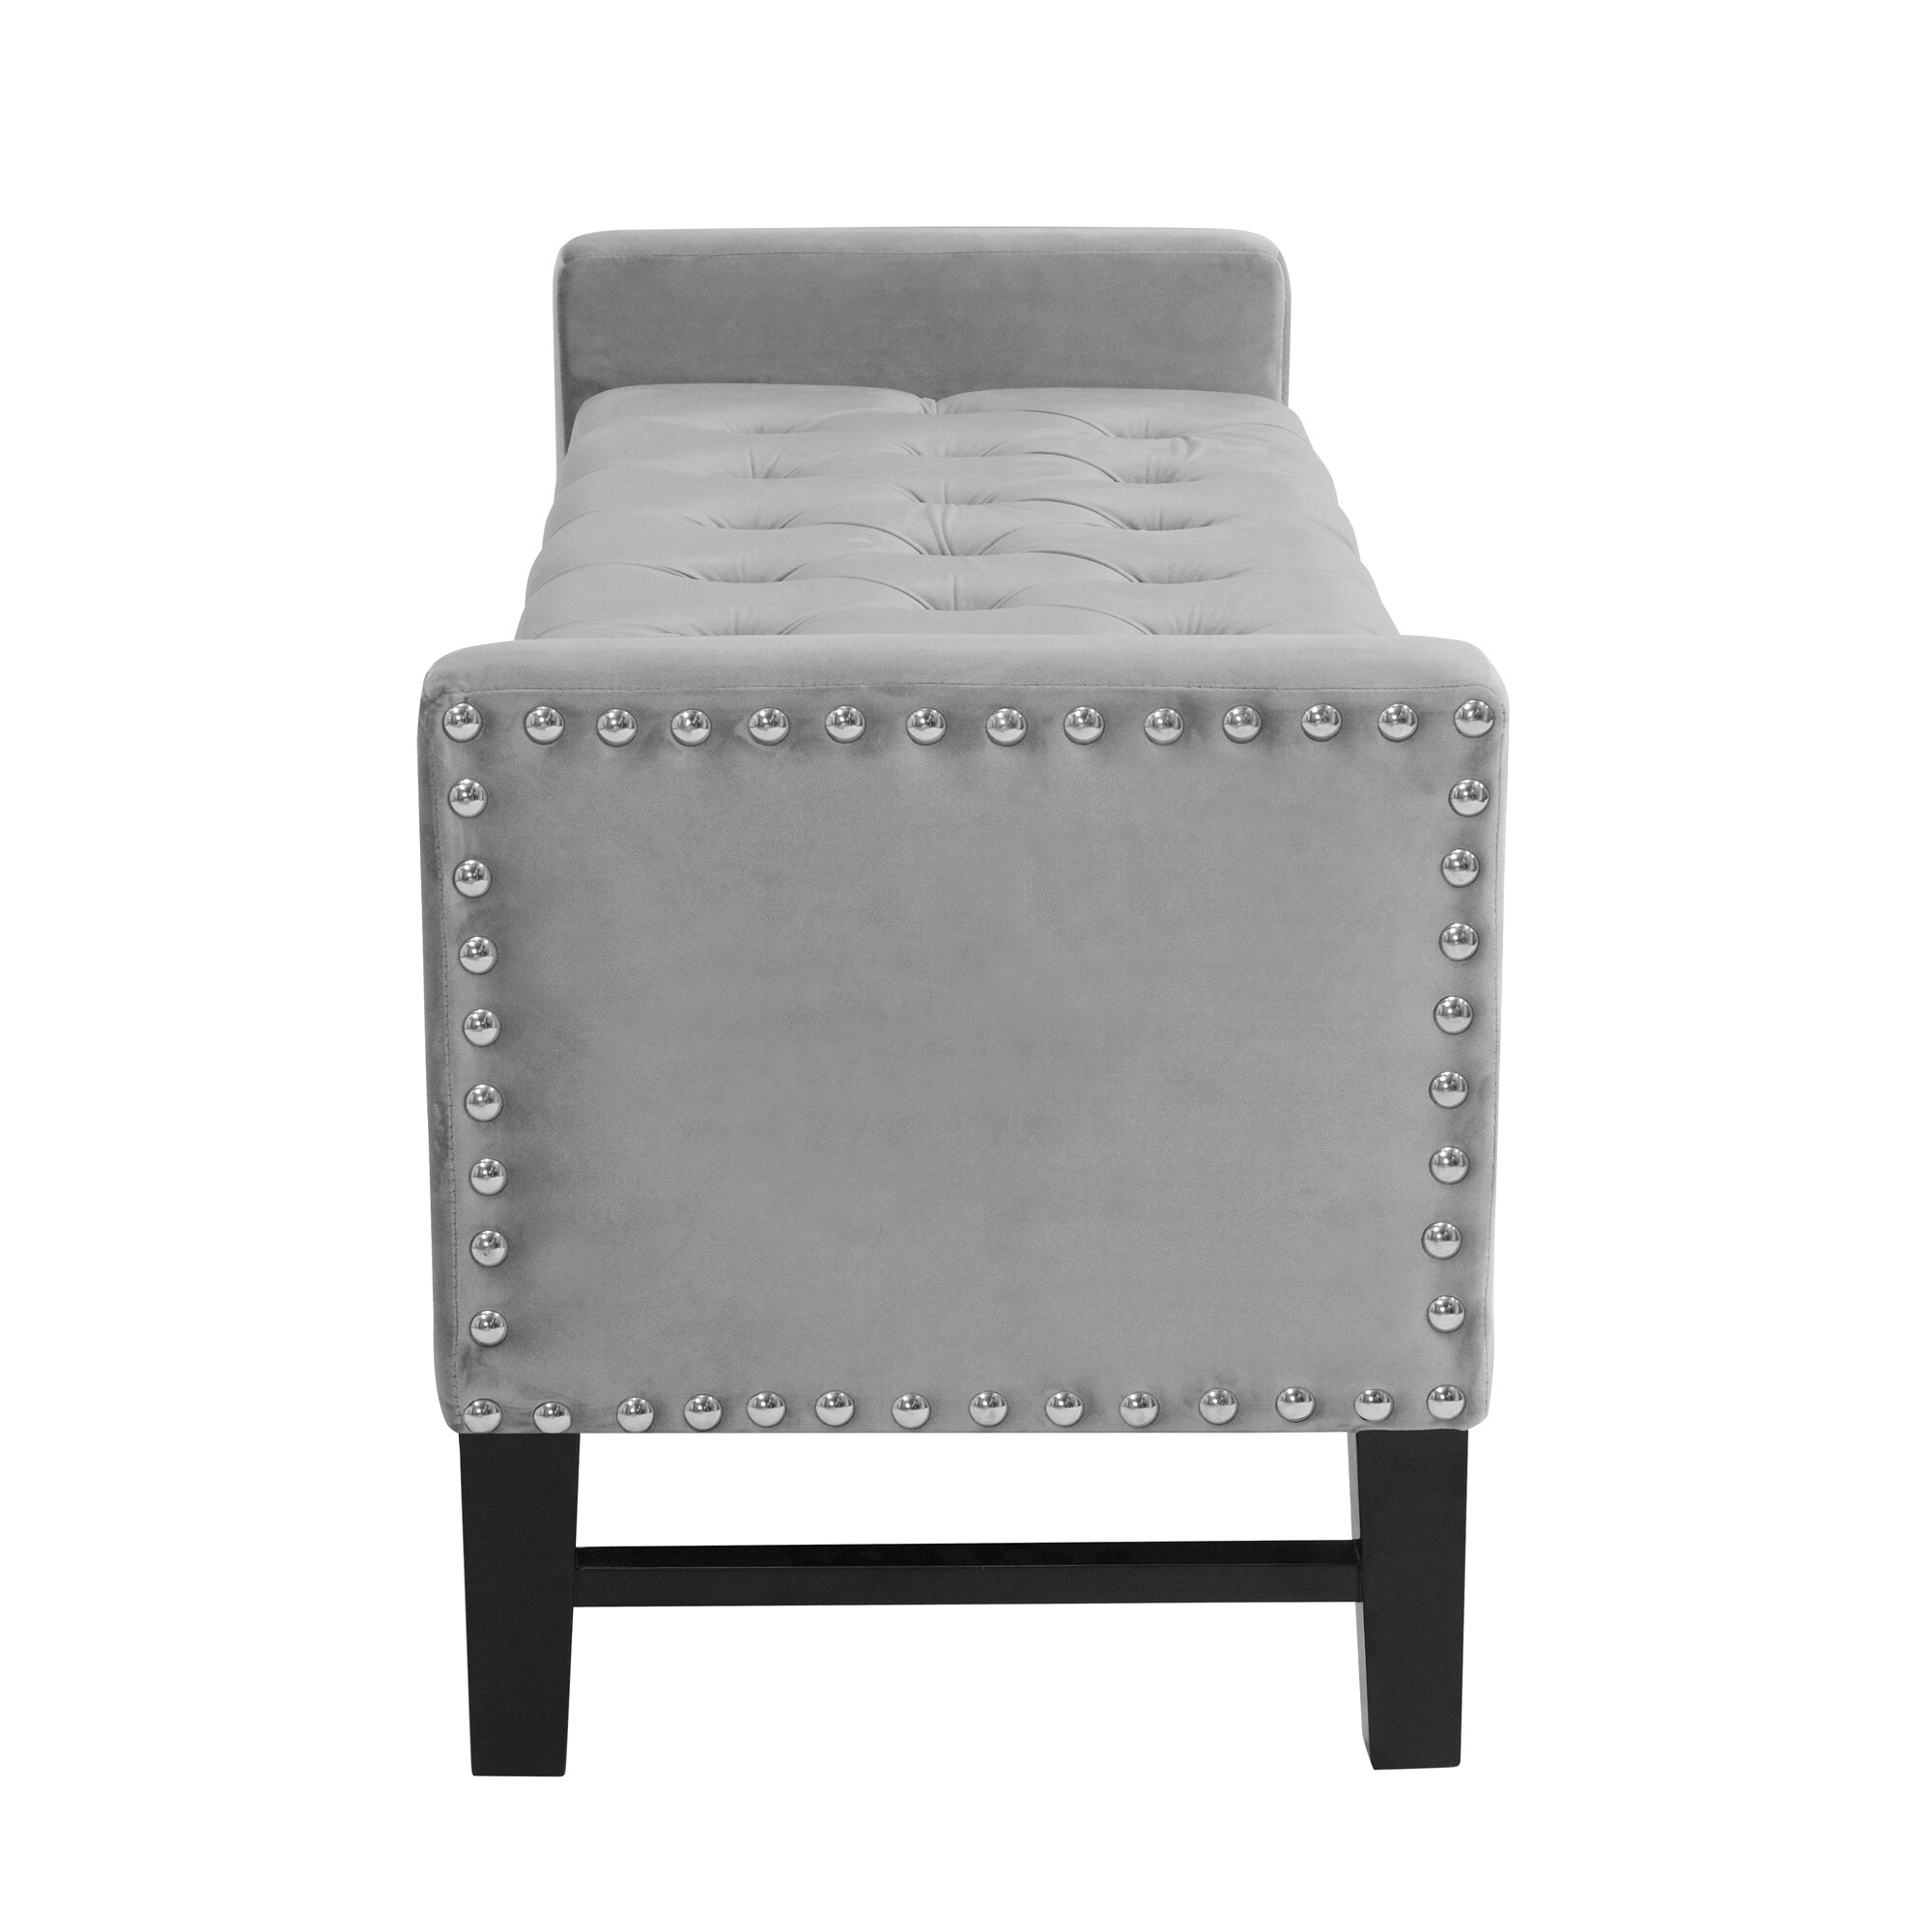 Storage Benches Bench 22.05-in Storage Modern Emmaline Light 50-in the department x with in Home at Inspired Grey